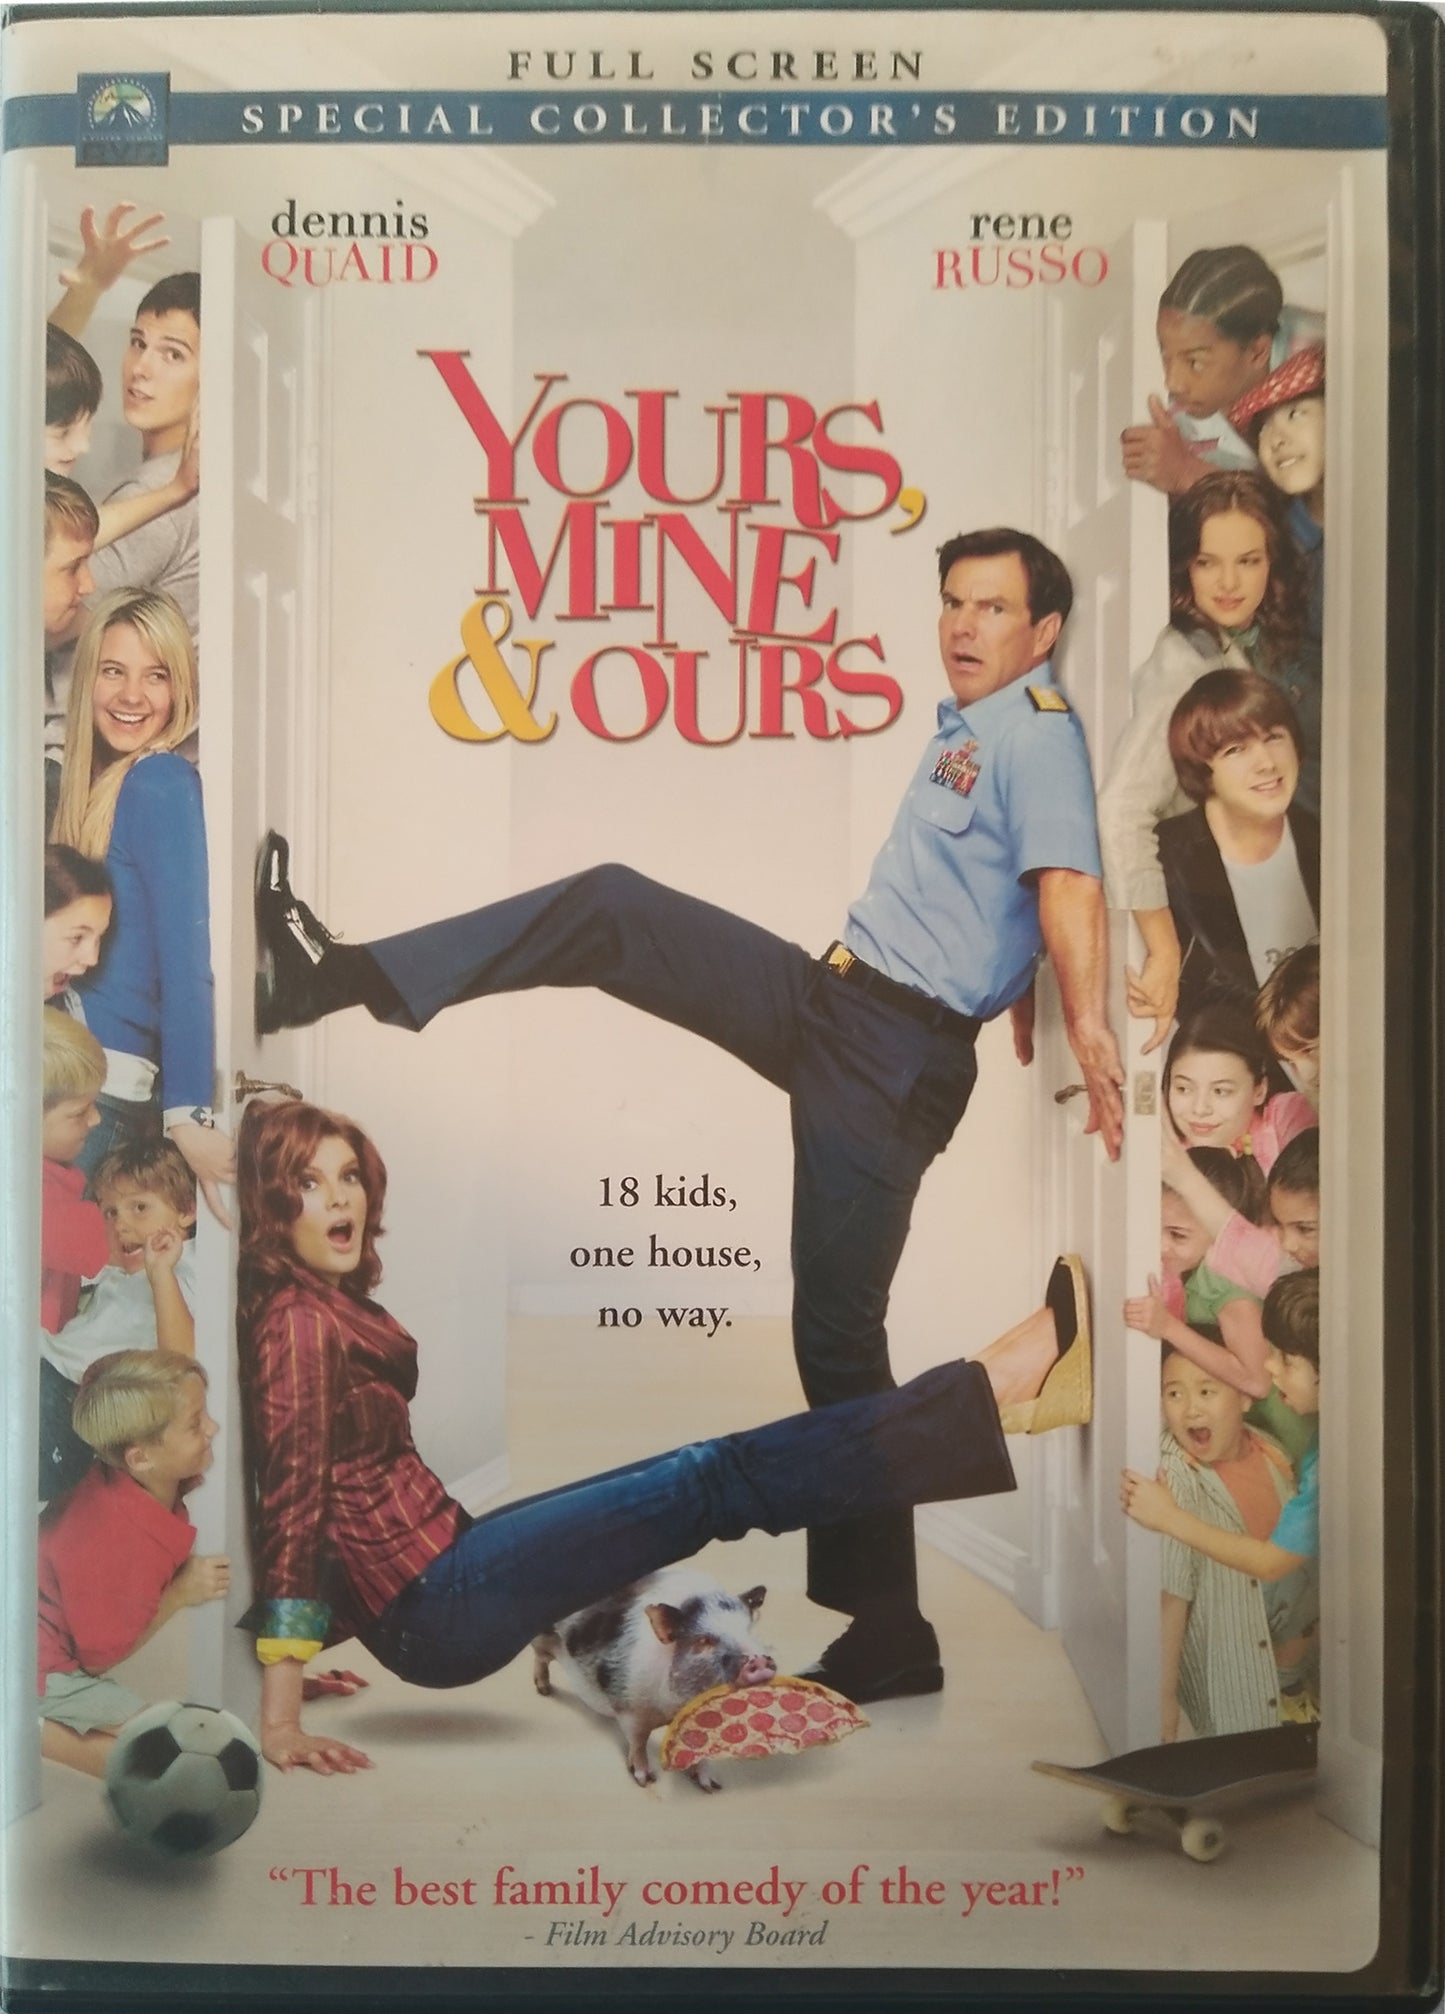 Yours, Mine & Ours - Full Screen Special Collectors Edition DVD